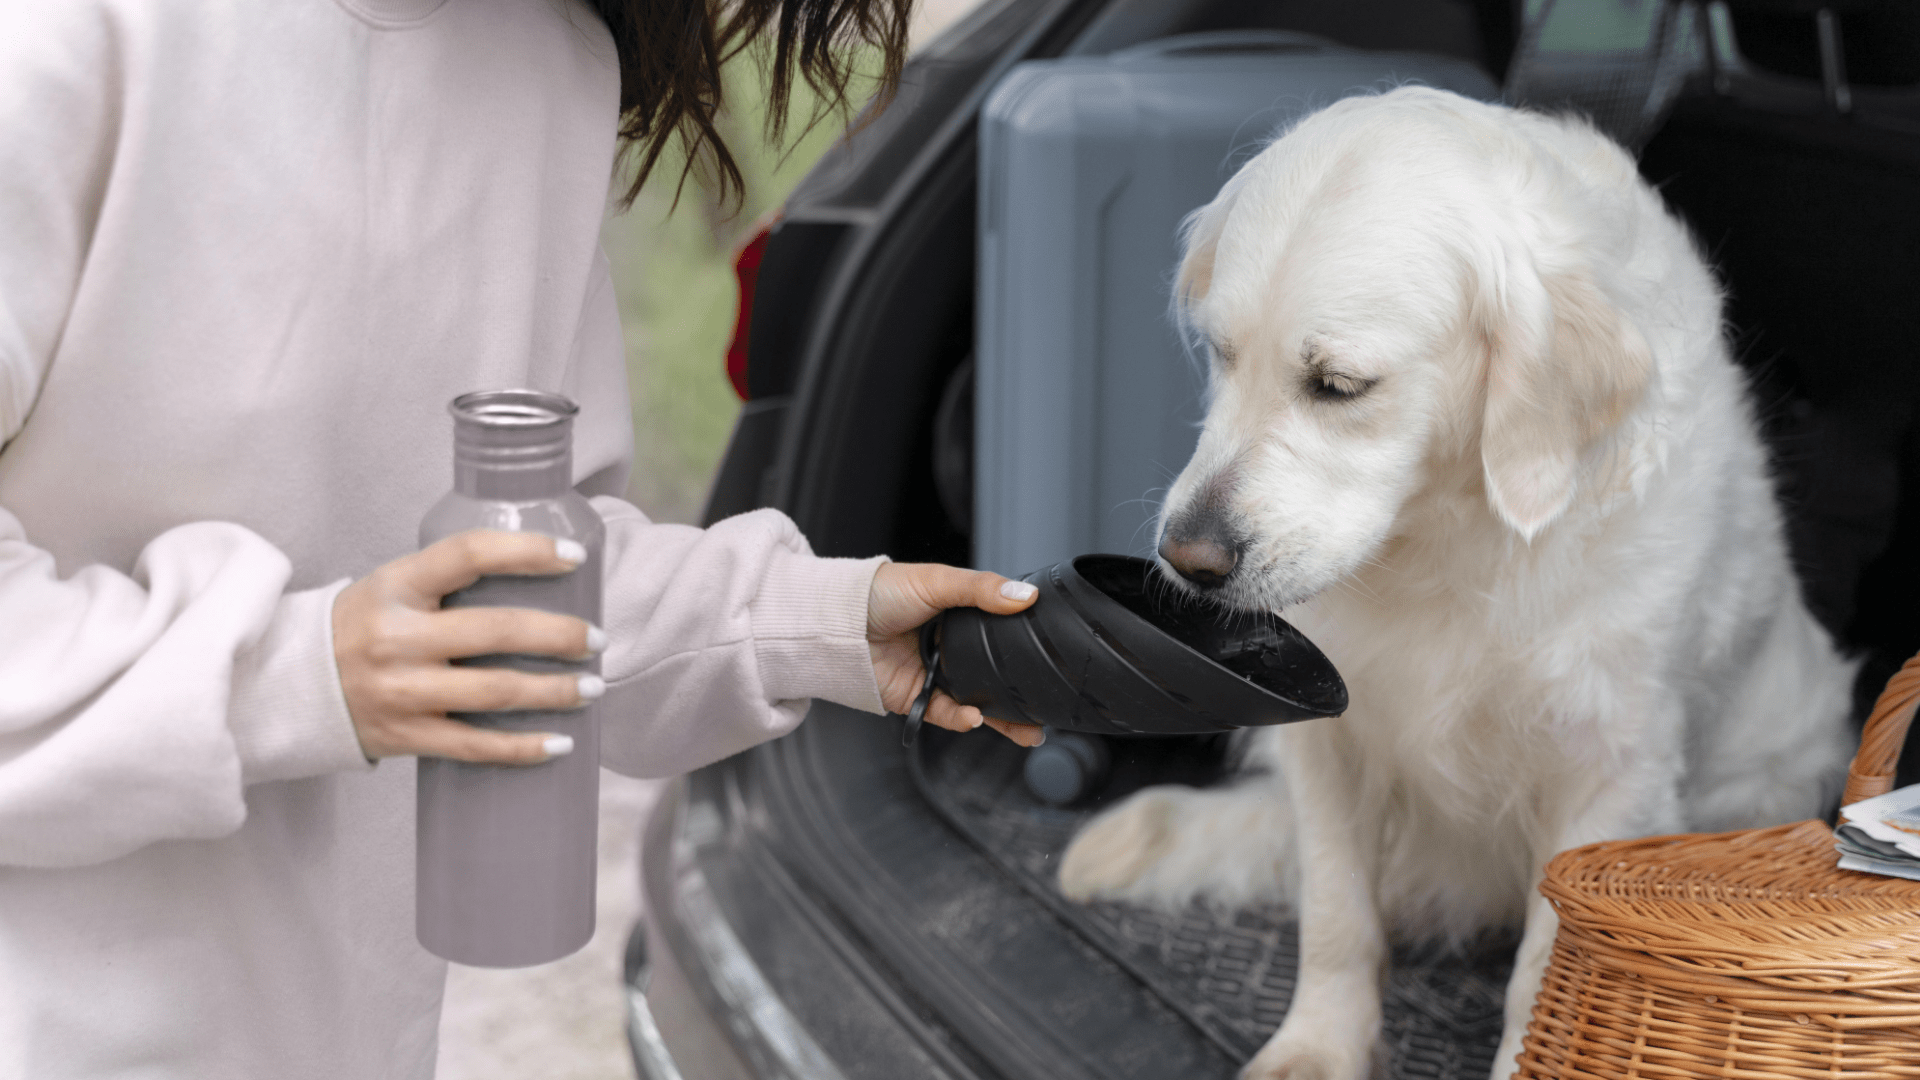 Give drinking water to your dog while travelling